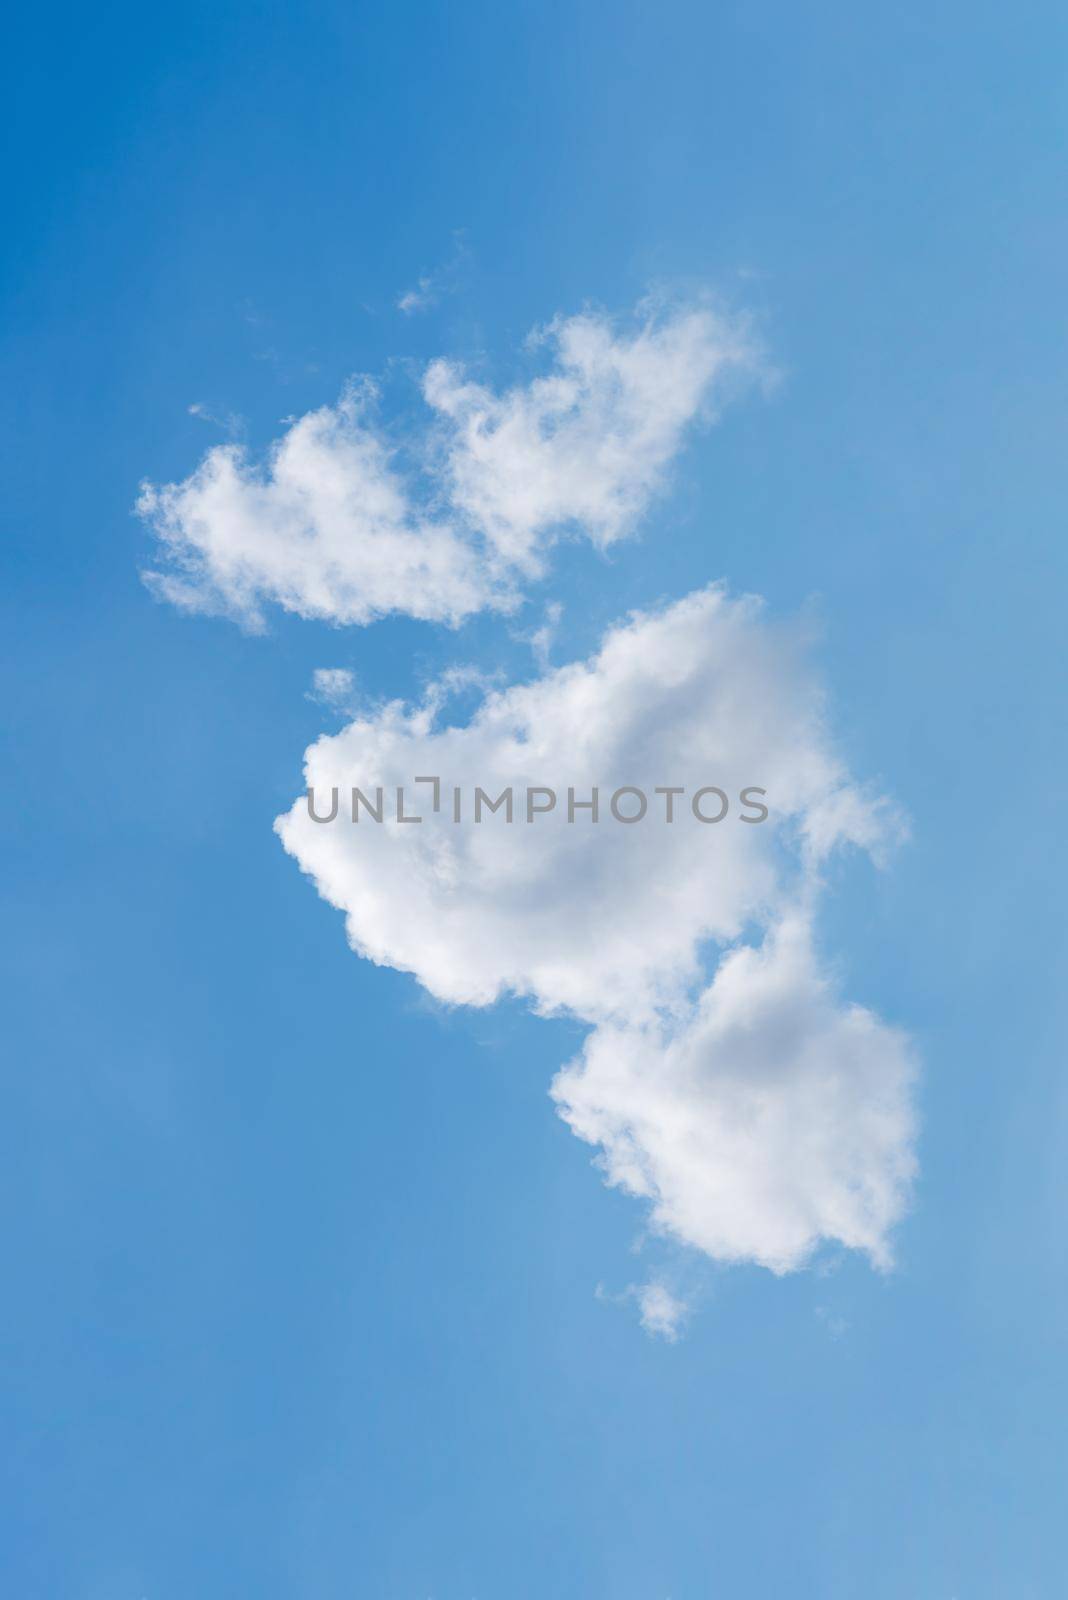 Nature white cloud on blue sky background in daytime, photo of nature cloud for freedom and nature concept.